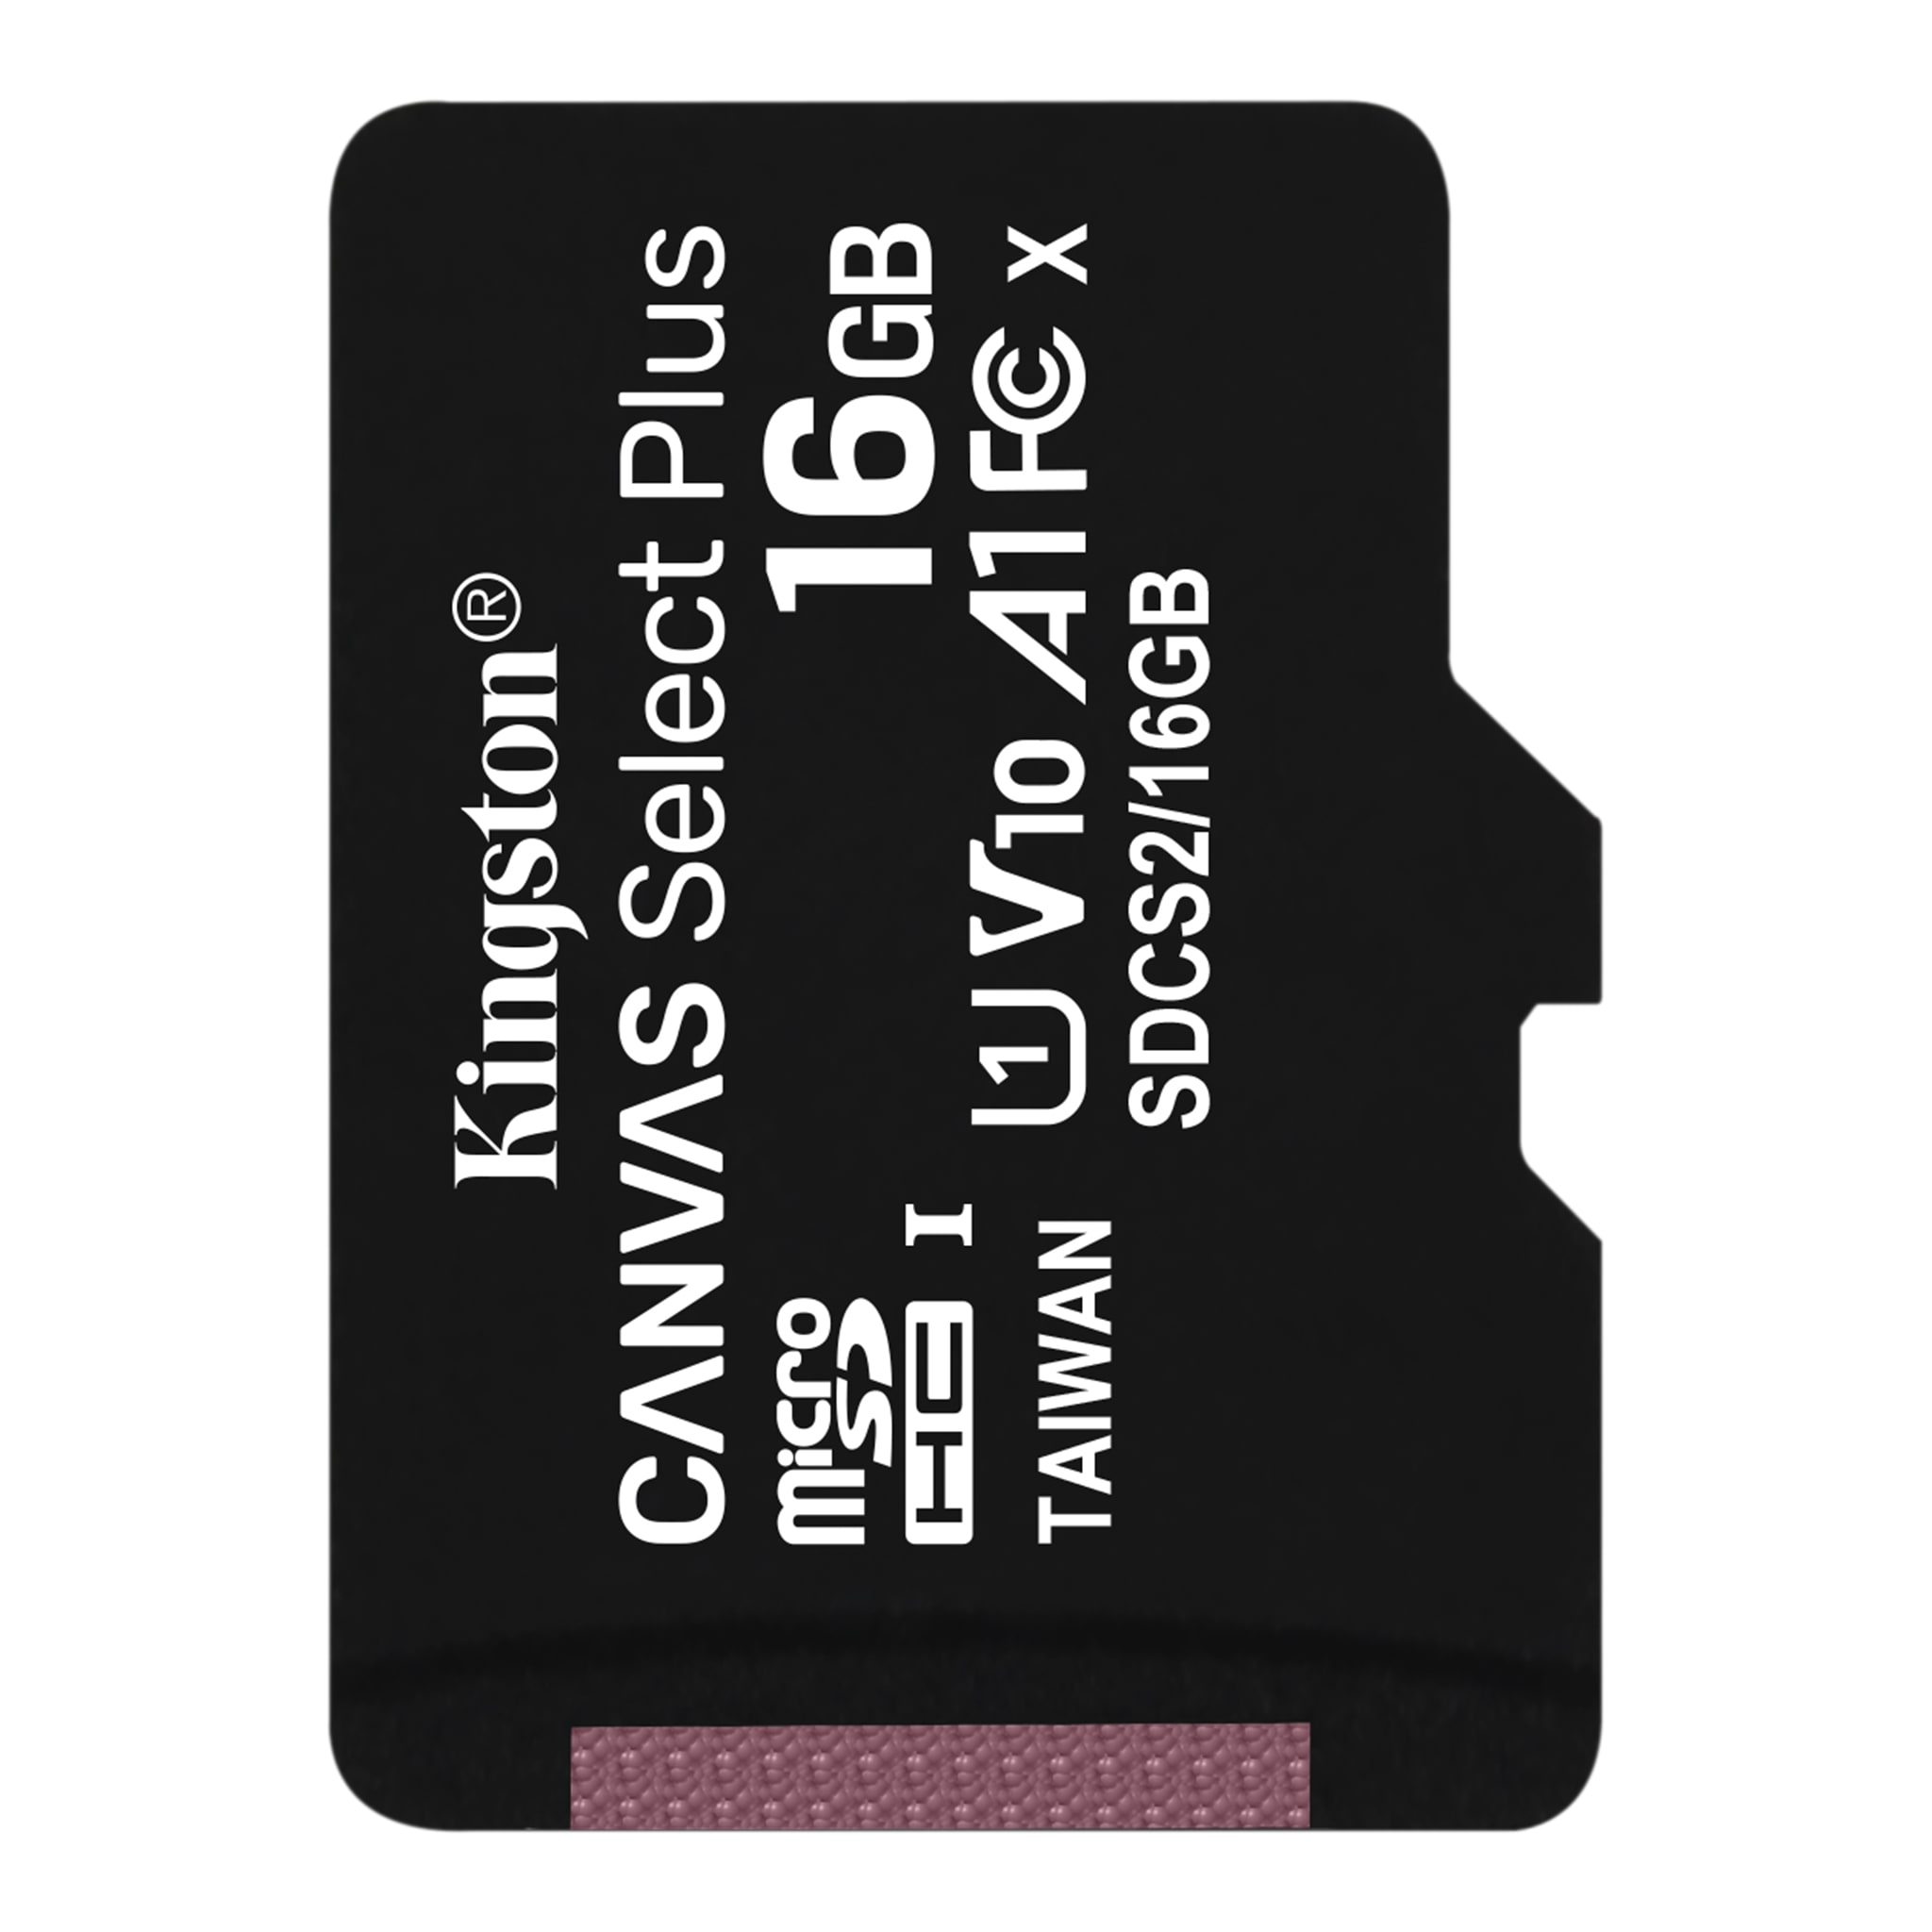 100MBs Works with Kingston Kingston 128GB LG Fortune MicroSDXC Canvas Select Plus Card Verified by SanFlash. 